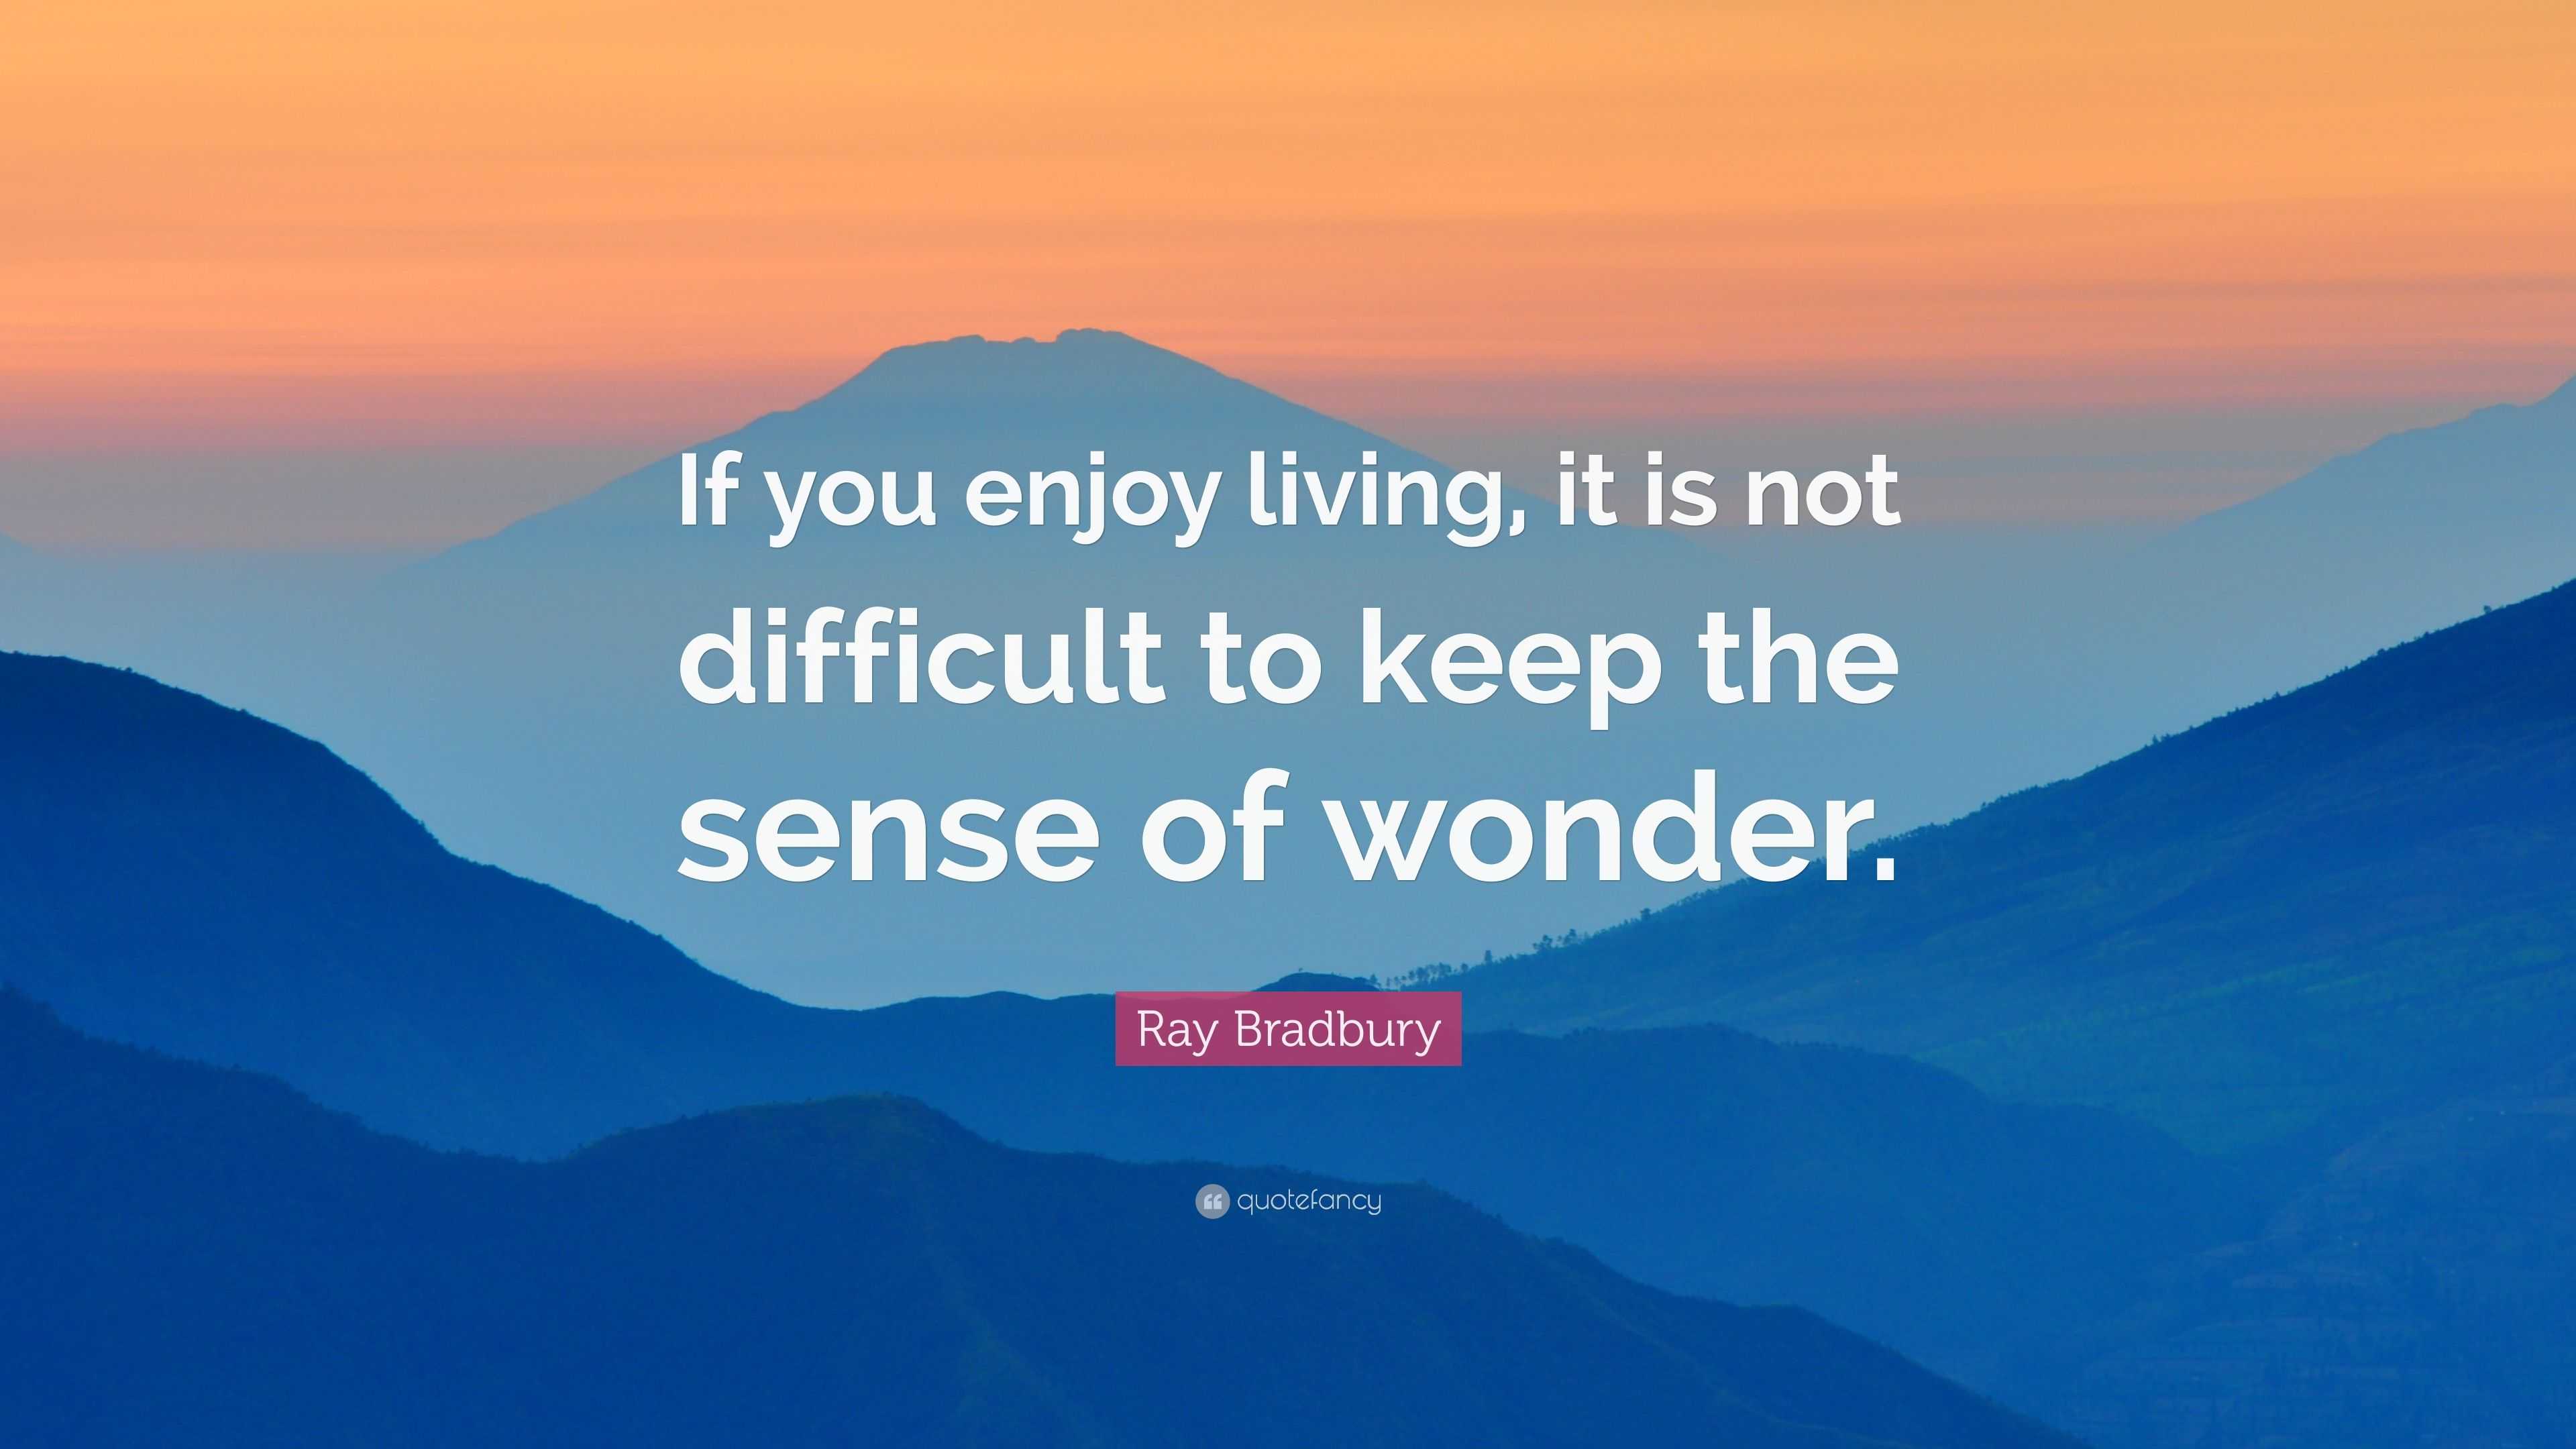 Ray Bradbury Quote: “If you enjoy living, it is not difficult to keep